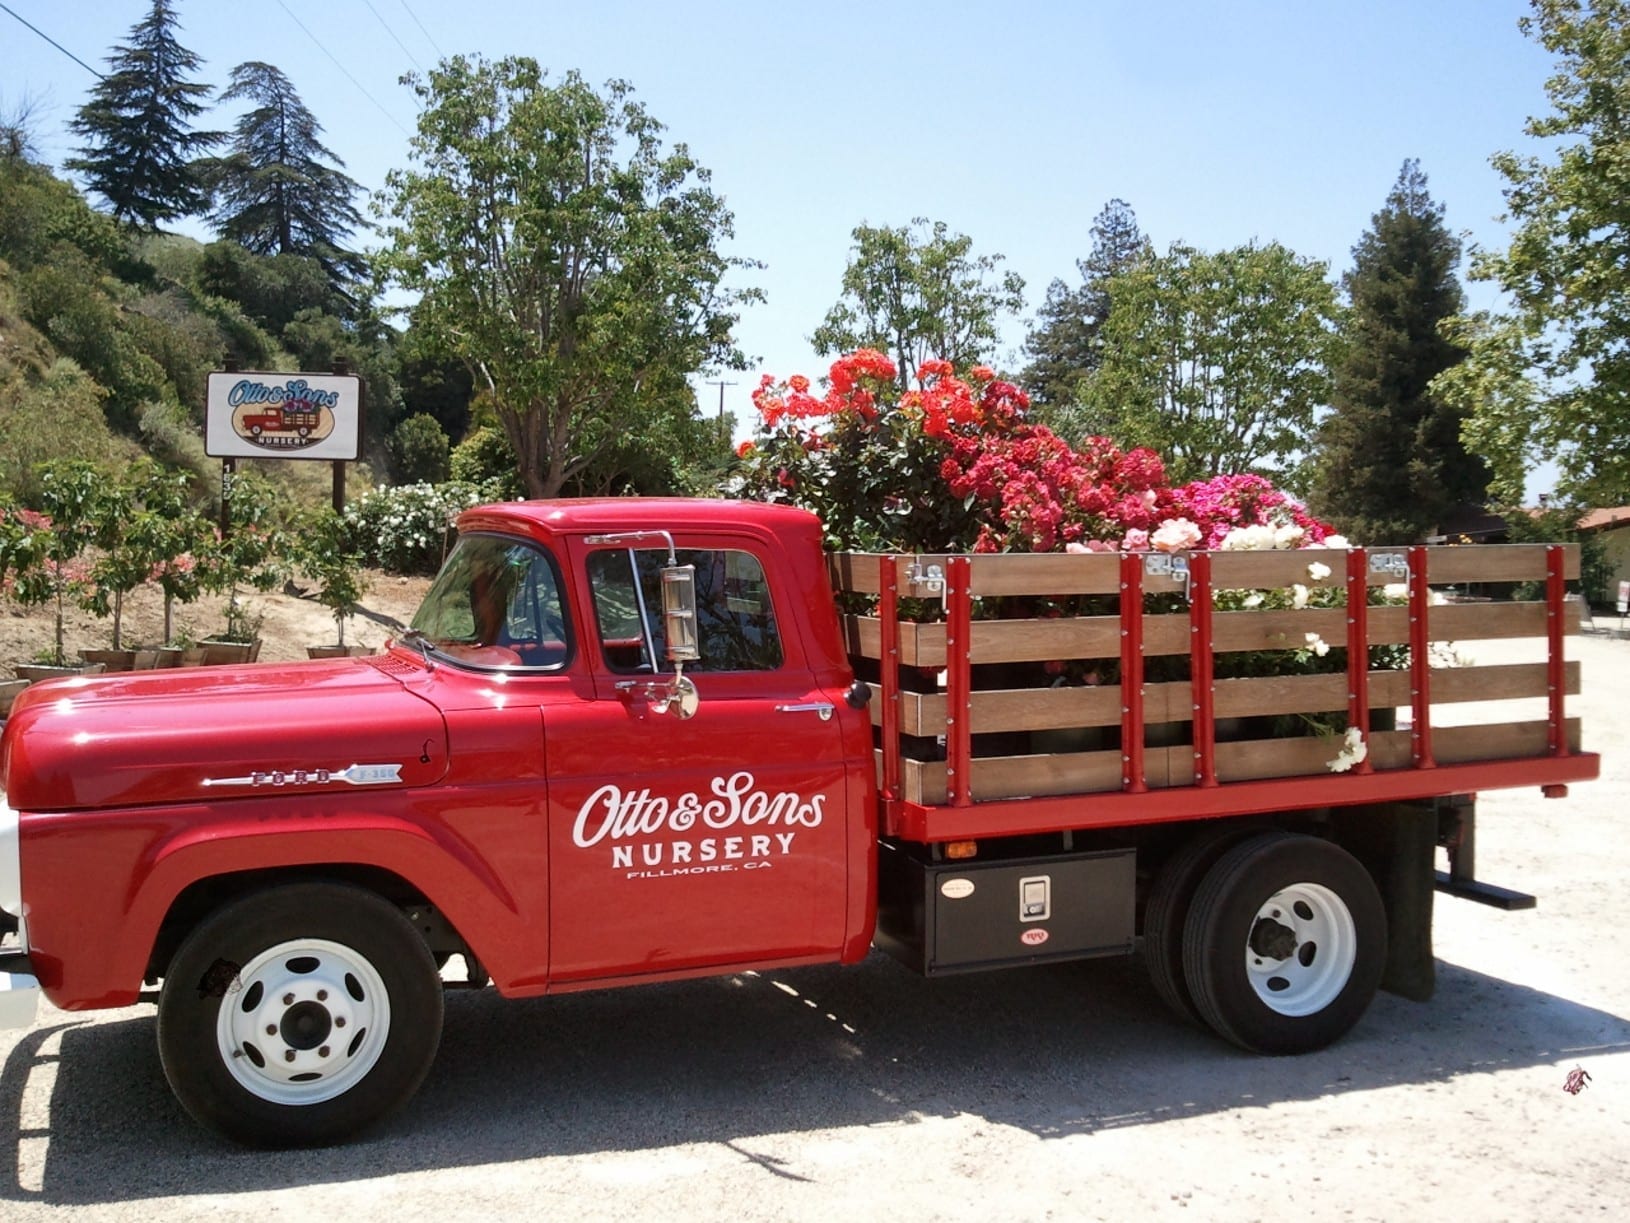 Otto & Sons Nursery Truck with Roses